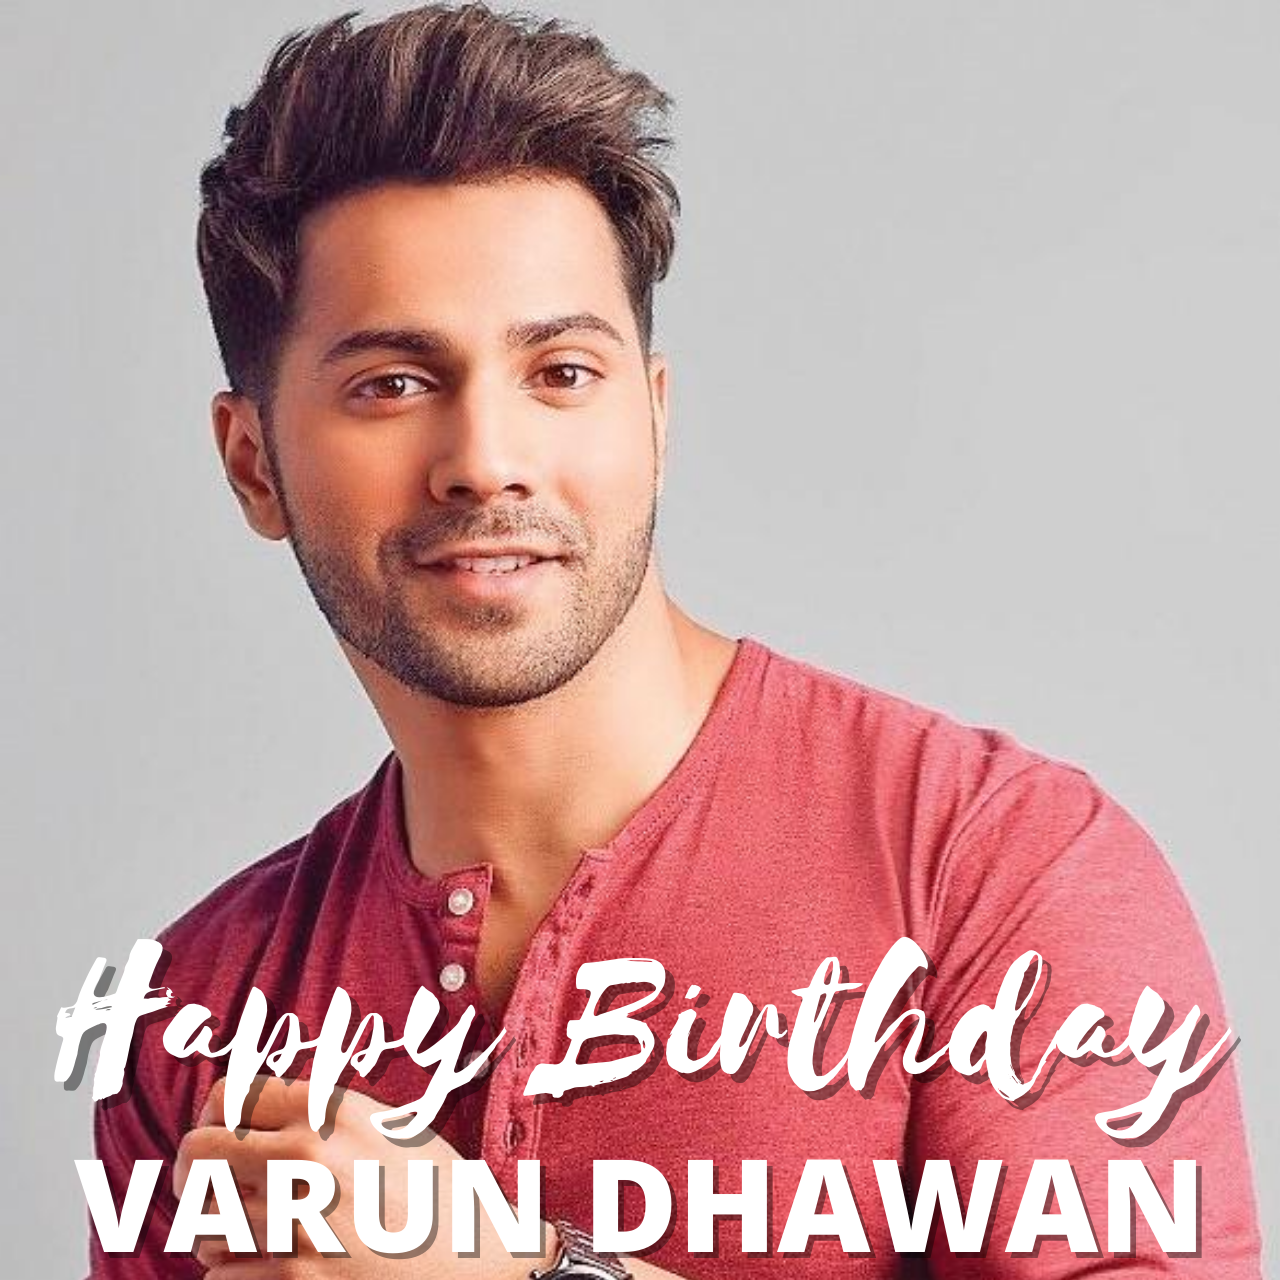 Happy Birthday Varun Dhawan Images, Wishes, and Greetings to share with your favorite Actor